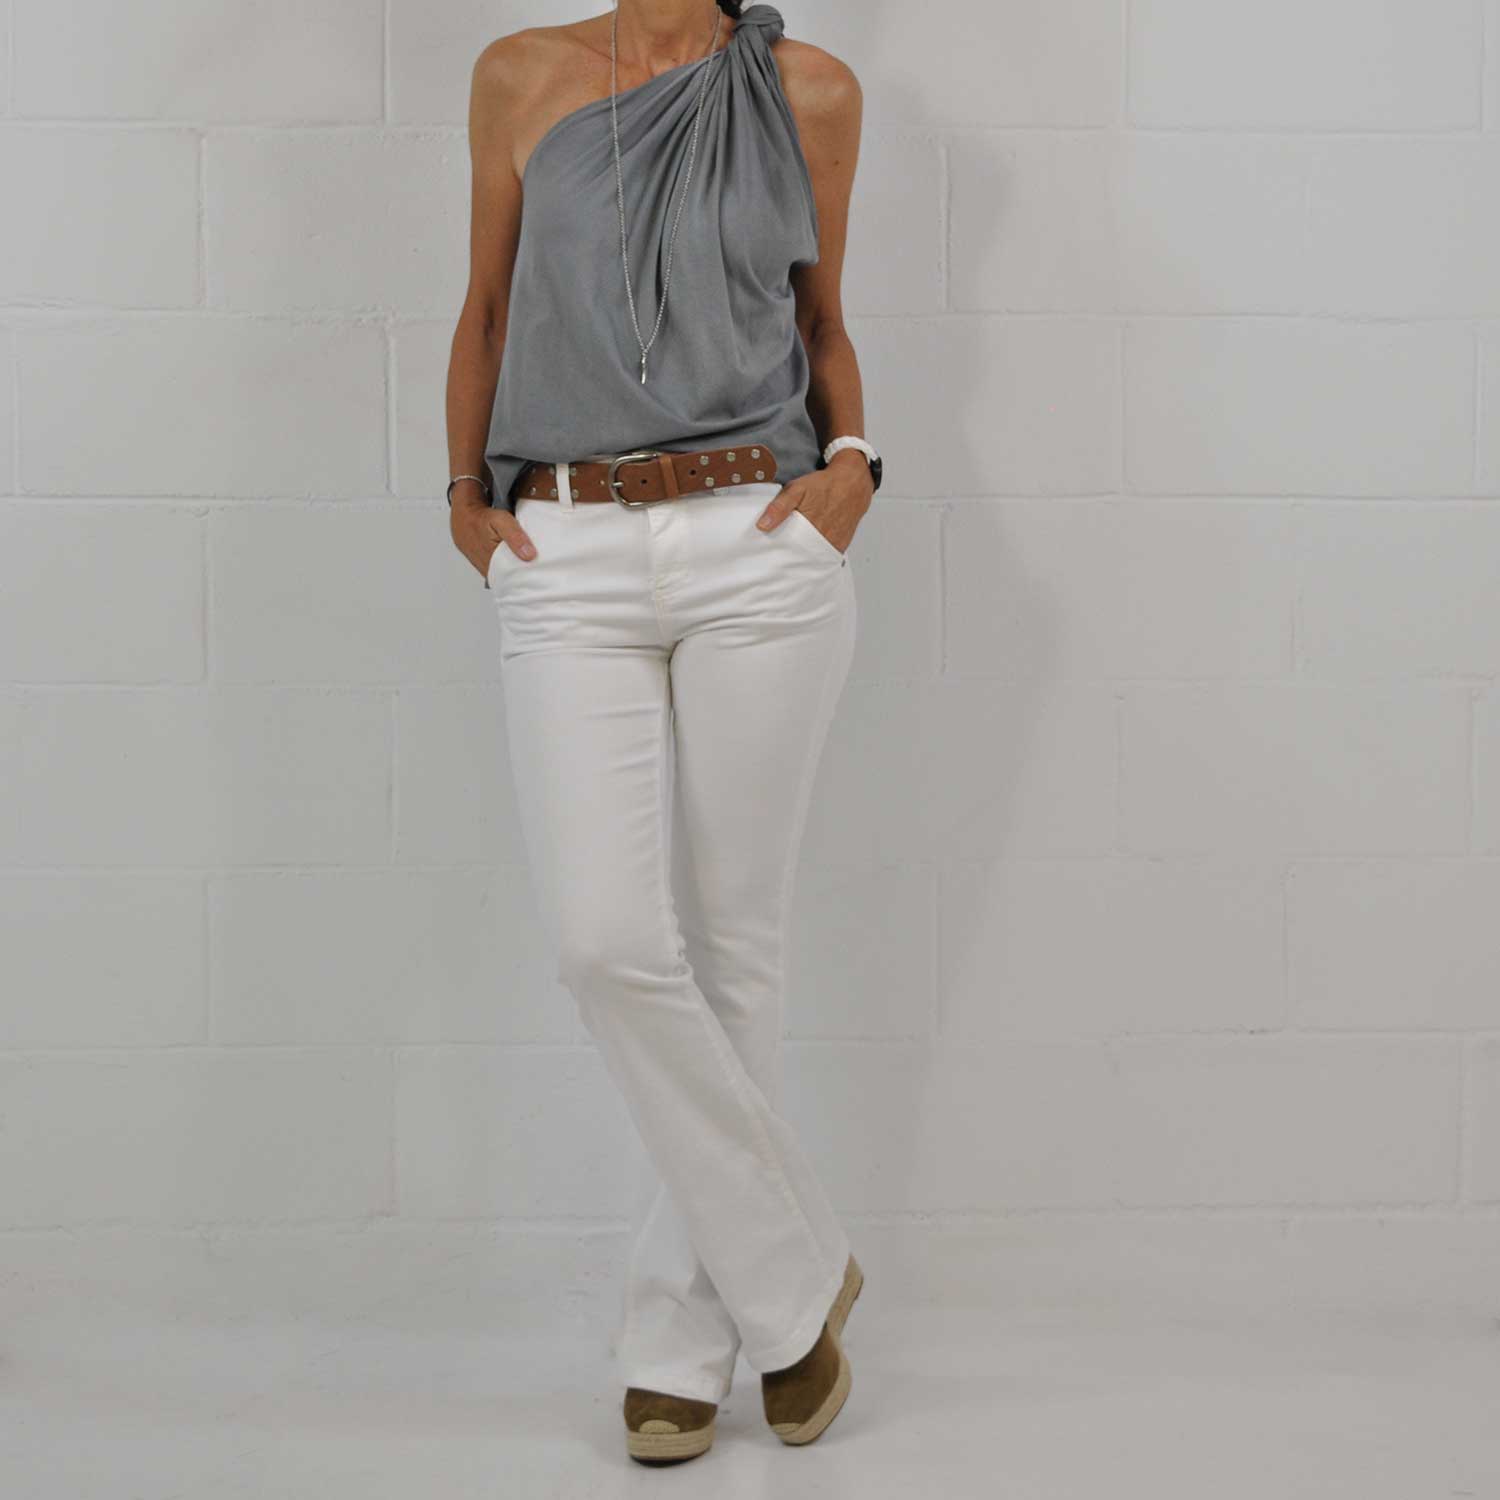 Gray knot top